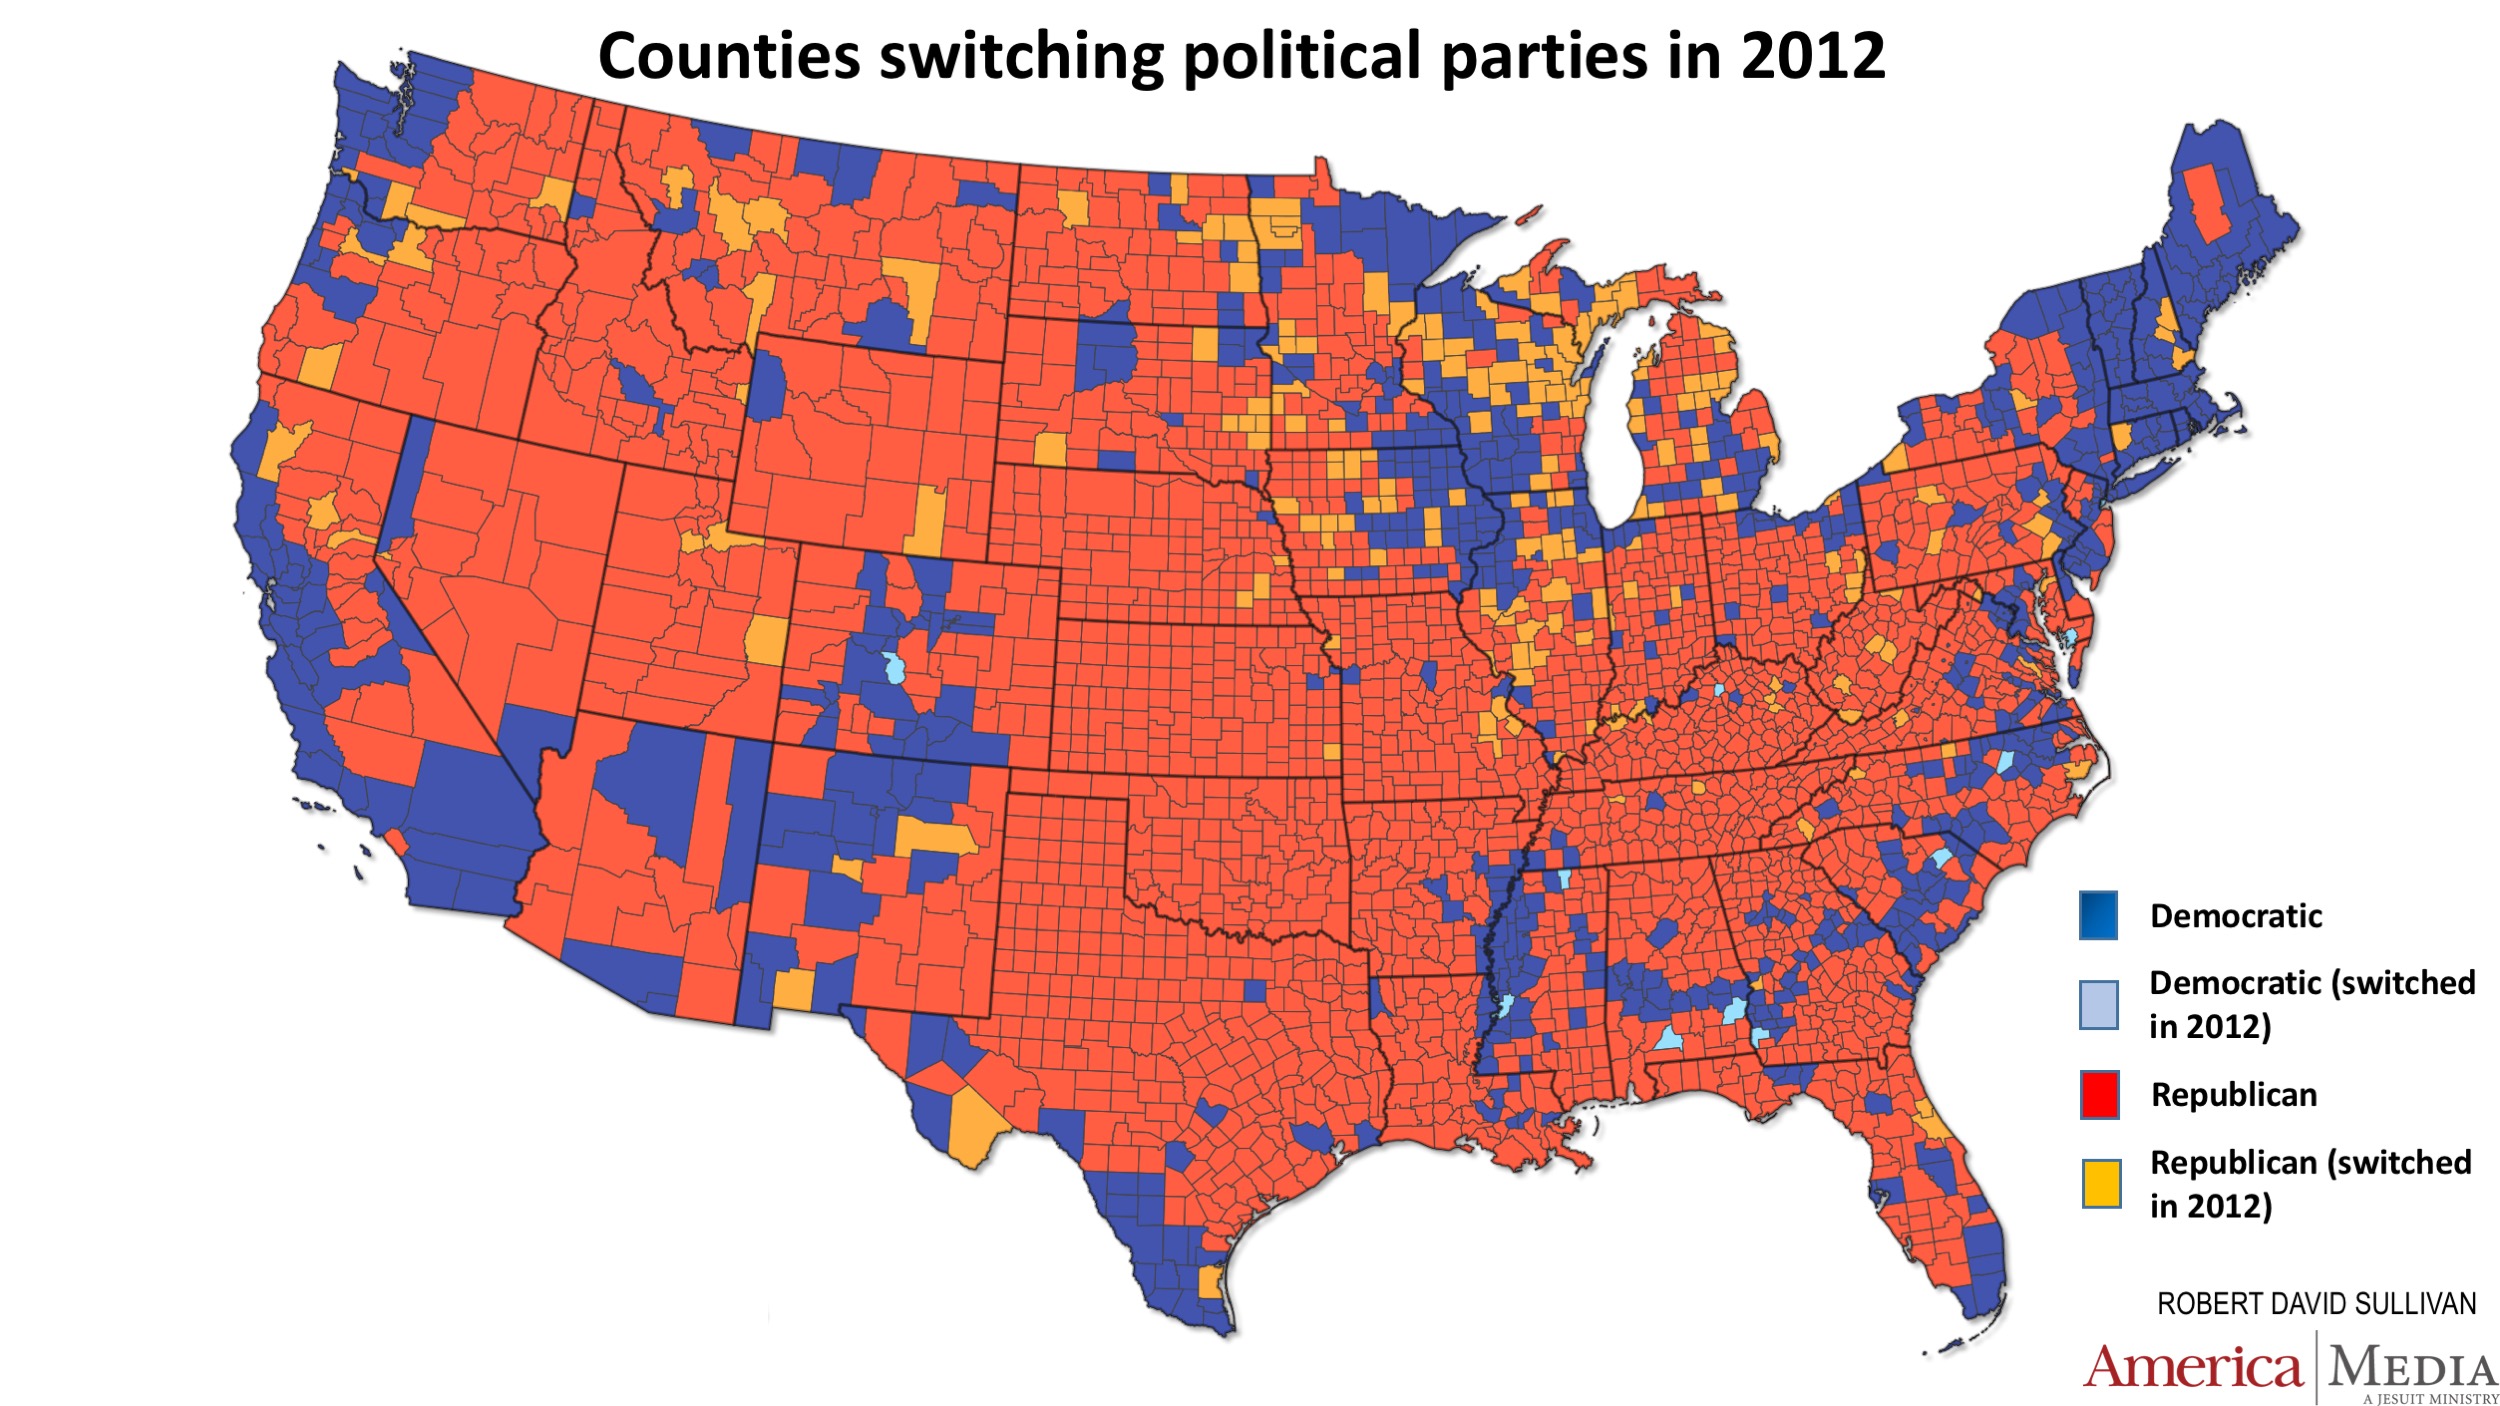 Why is red for Republicans and blue for Democrats?